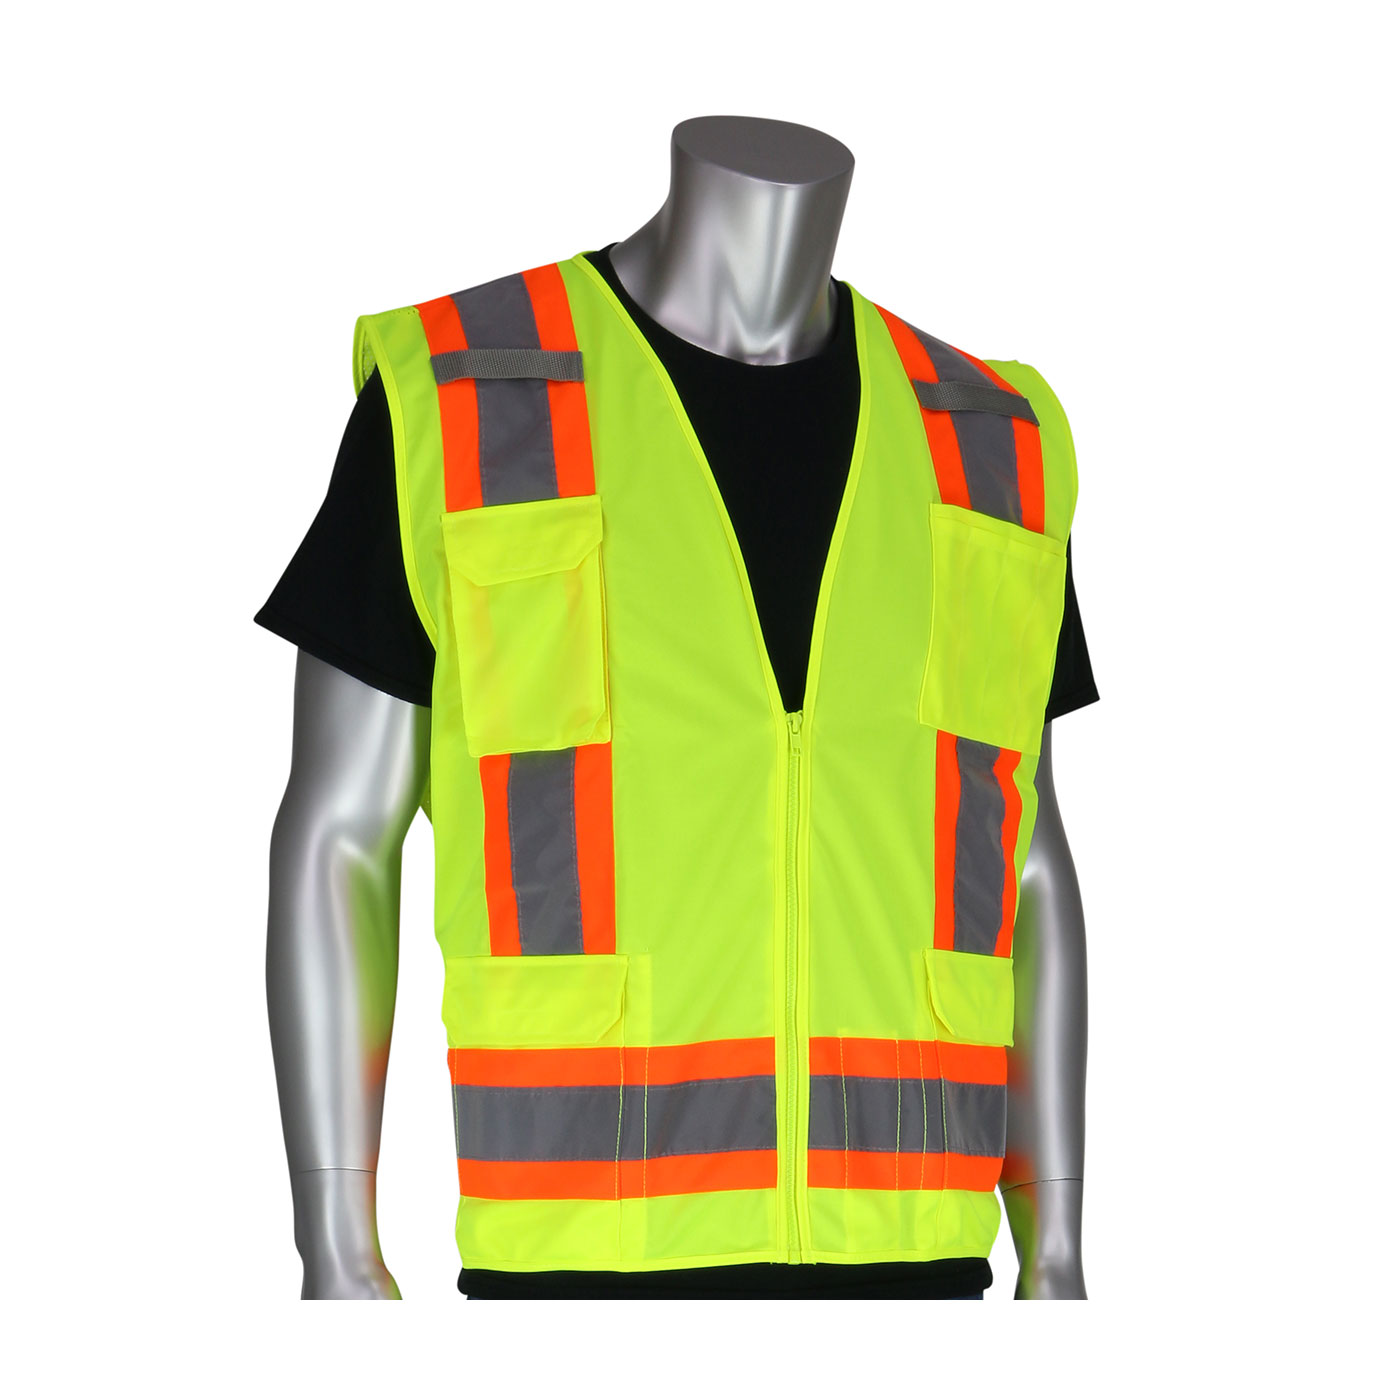 PIP 302-0500-YEL/XL ANSI Type R Class 2 Two-Tone Eleven Pocket Yellow Surveyors Vest with Solid Front and Mesh Back - X-Large PID-302 0500YEL XL